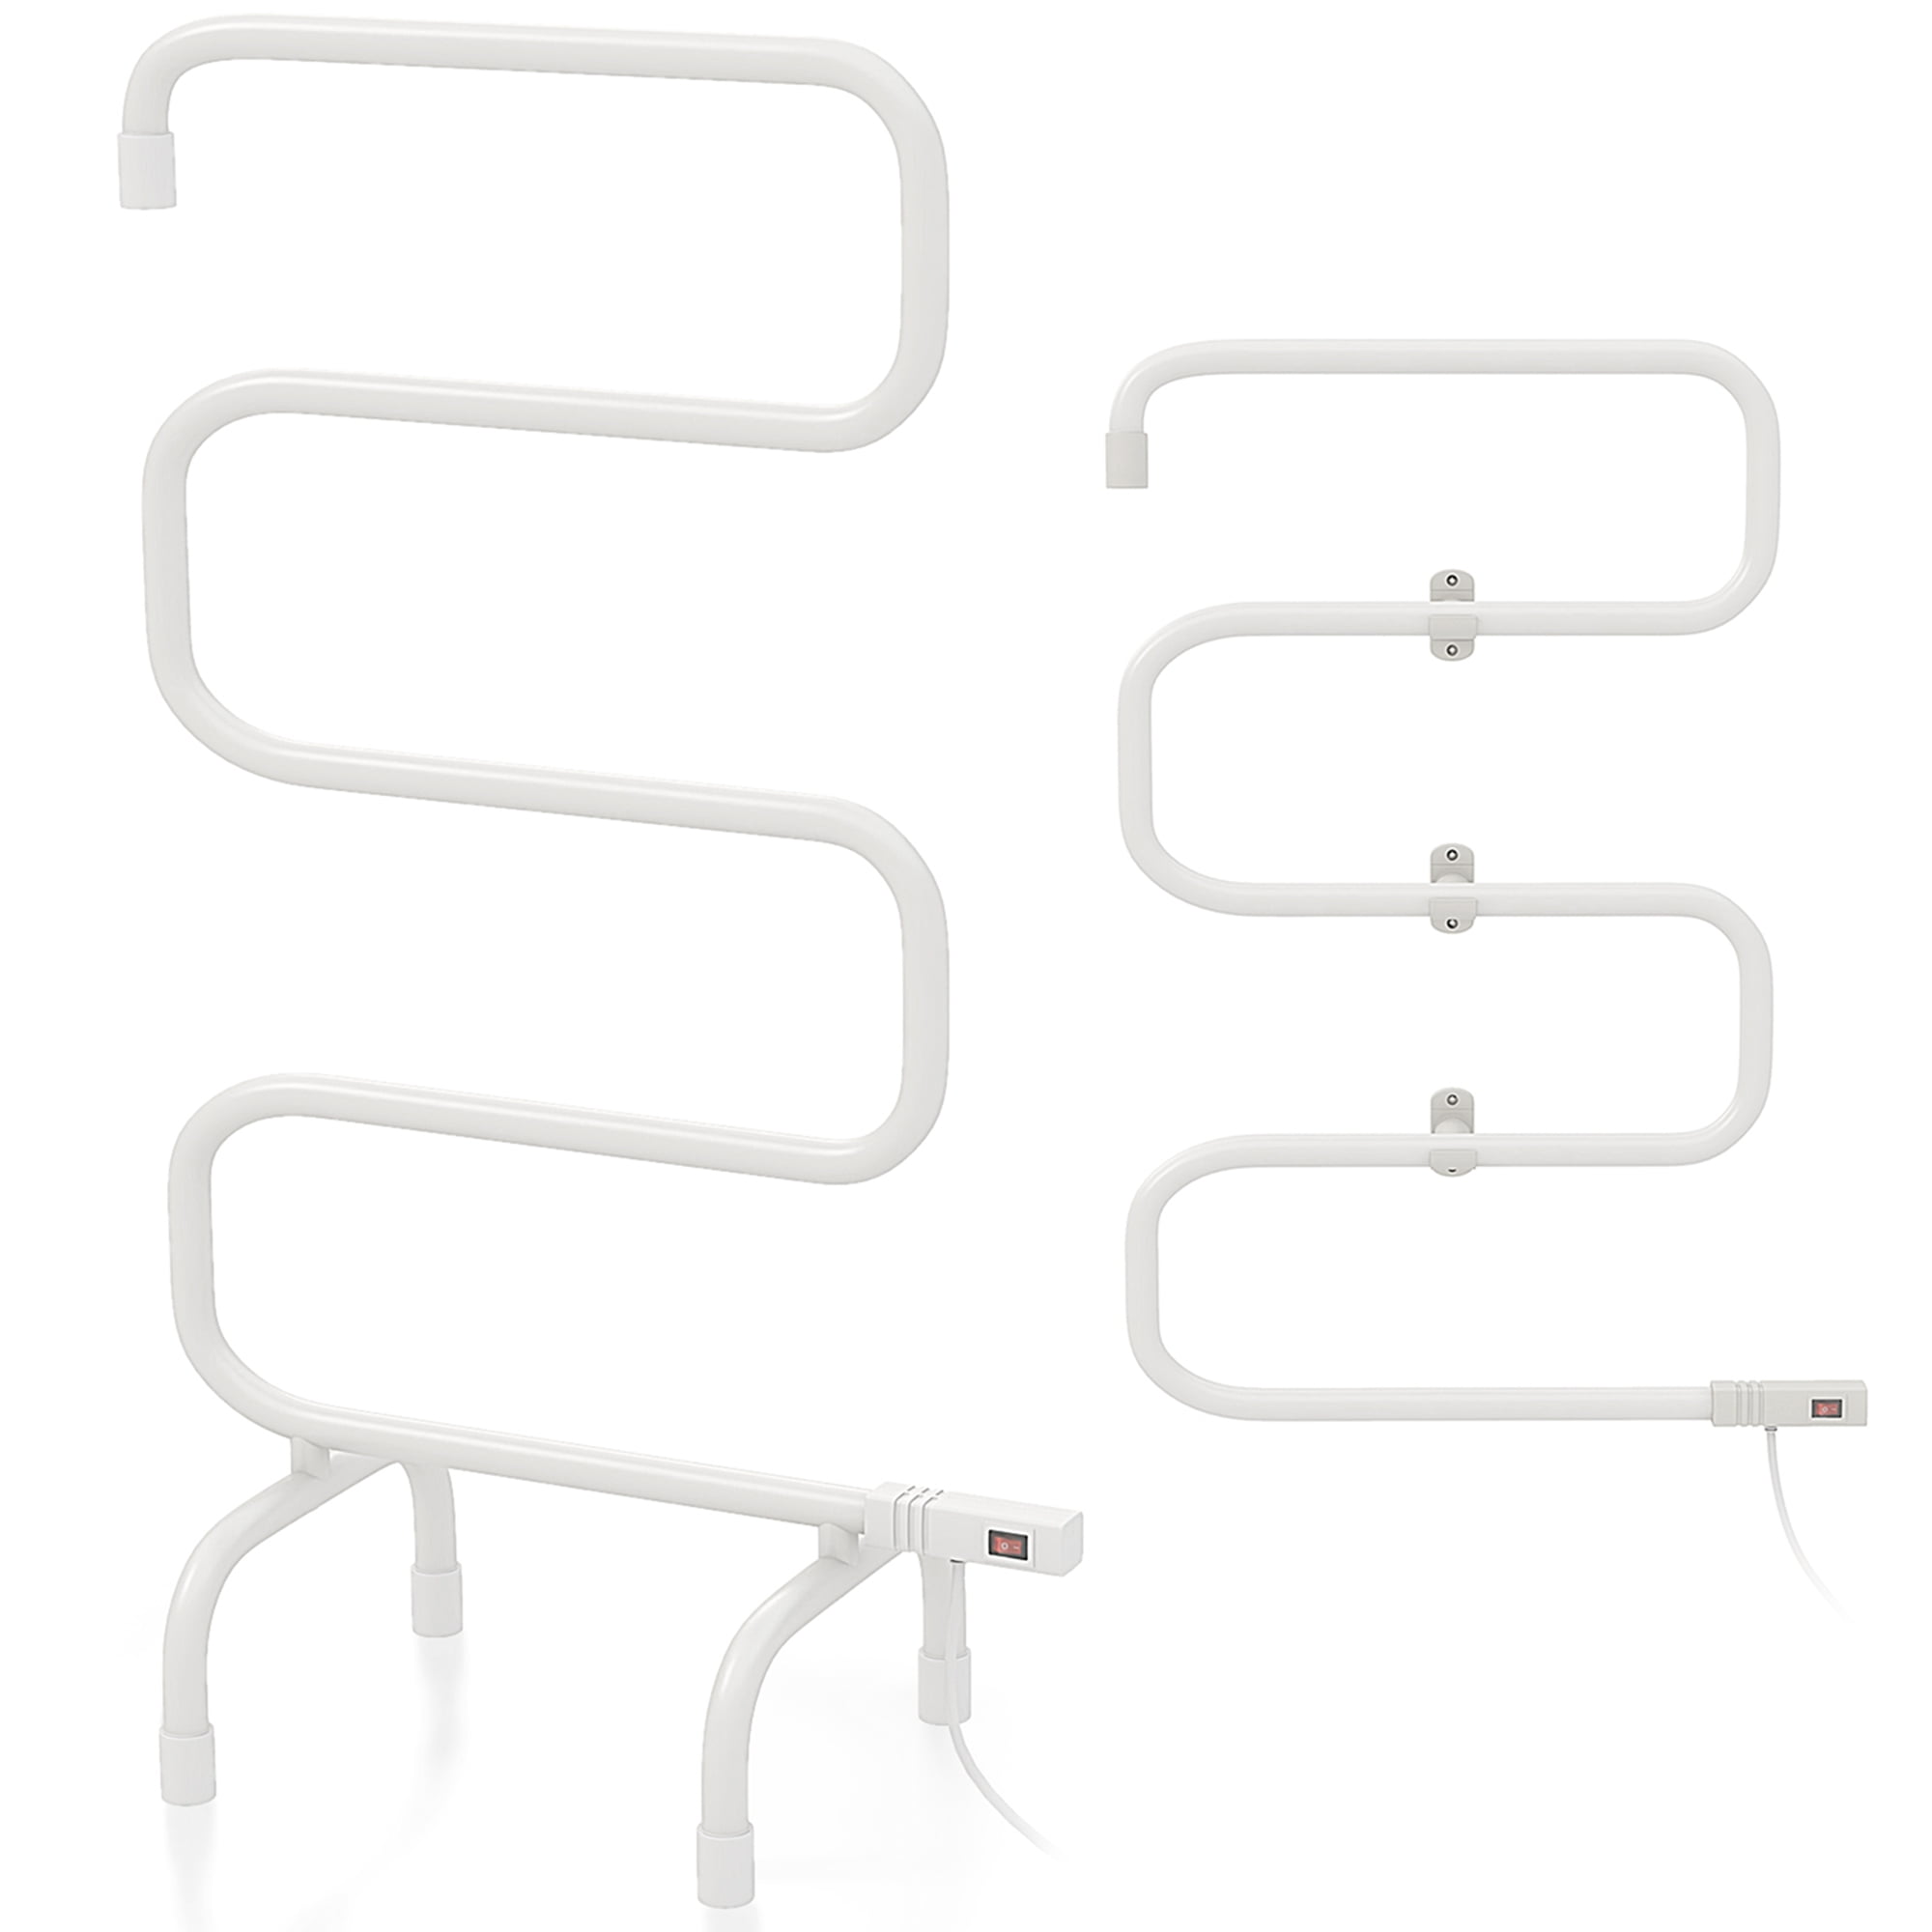 Heated Clothes Drying Rack/ Towel Warmer for Sale in Austin, TX